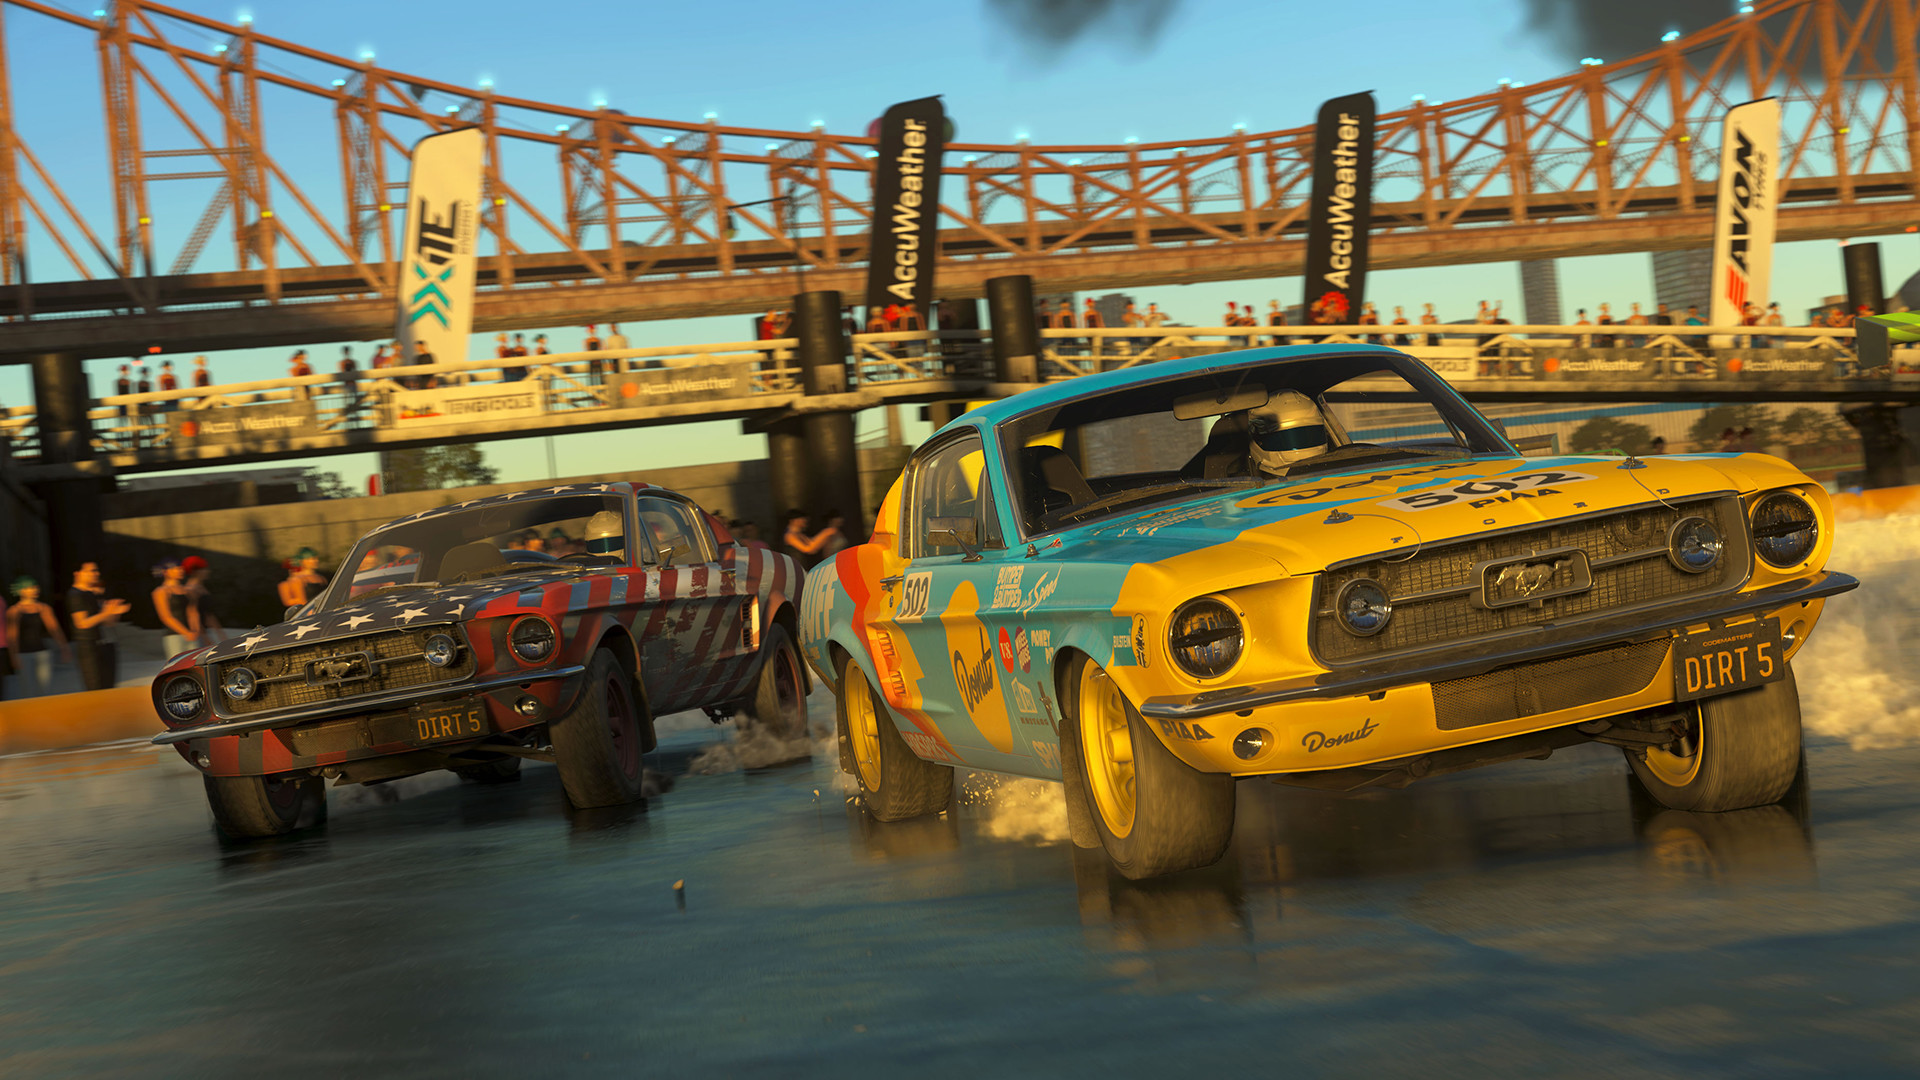 Dirt 5 Delayed to October 16